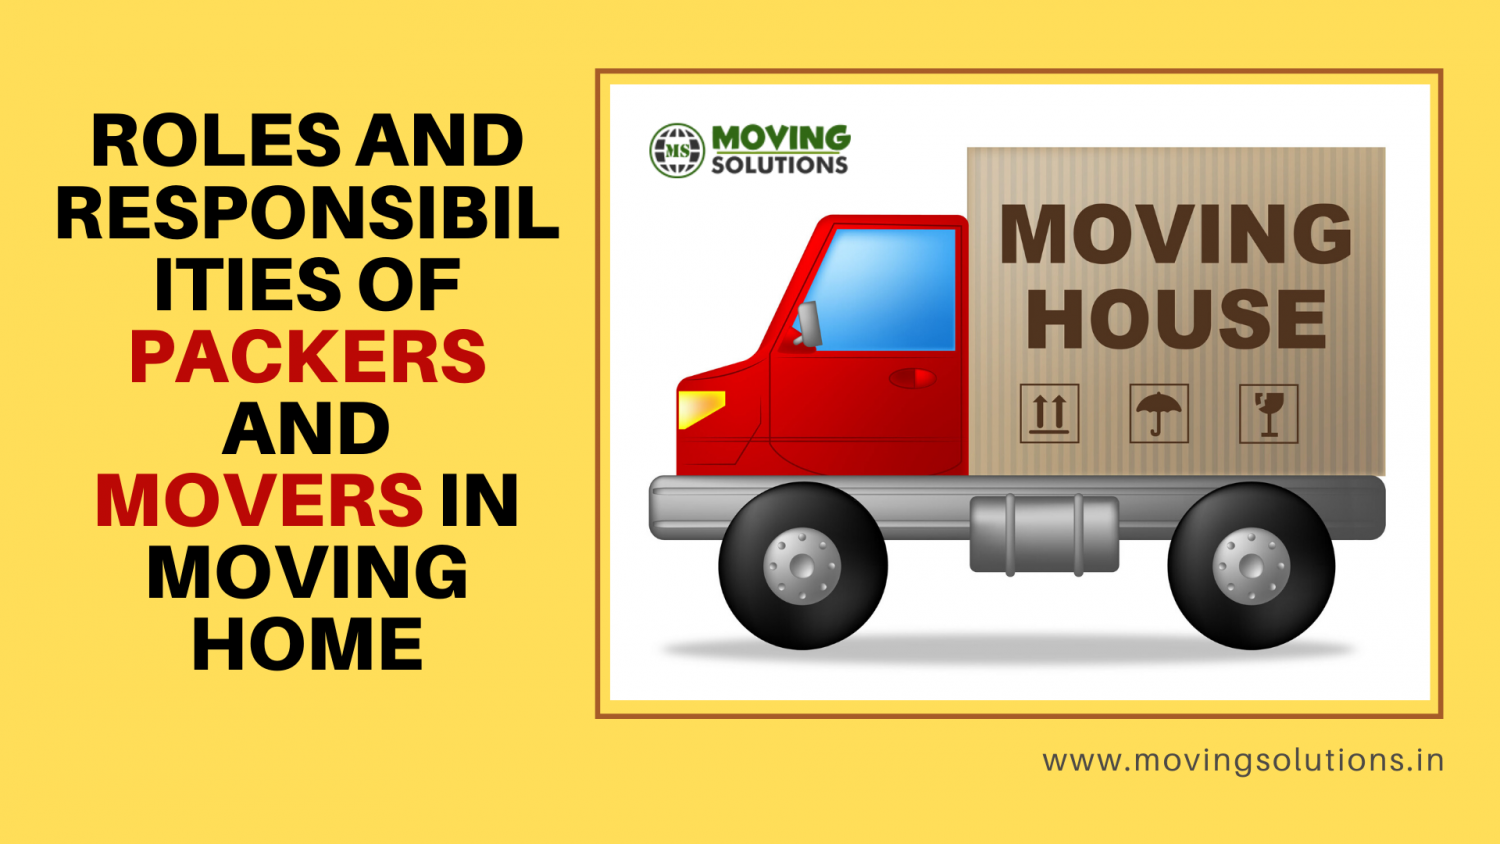 The roles and responsibilities of packers and movers in moving home